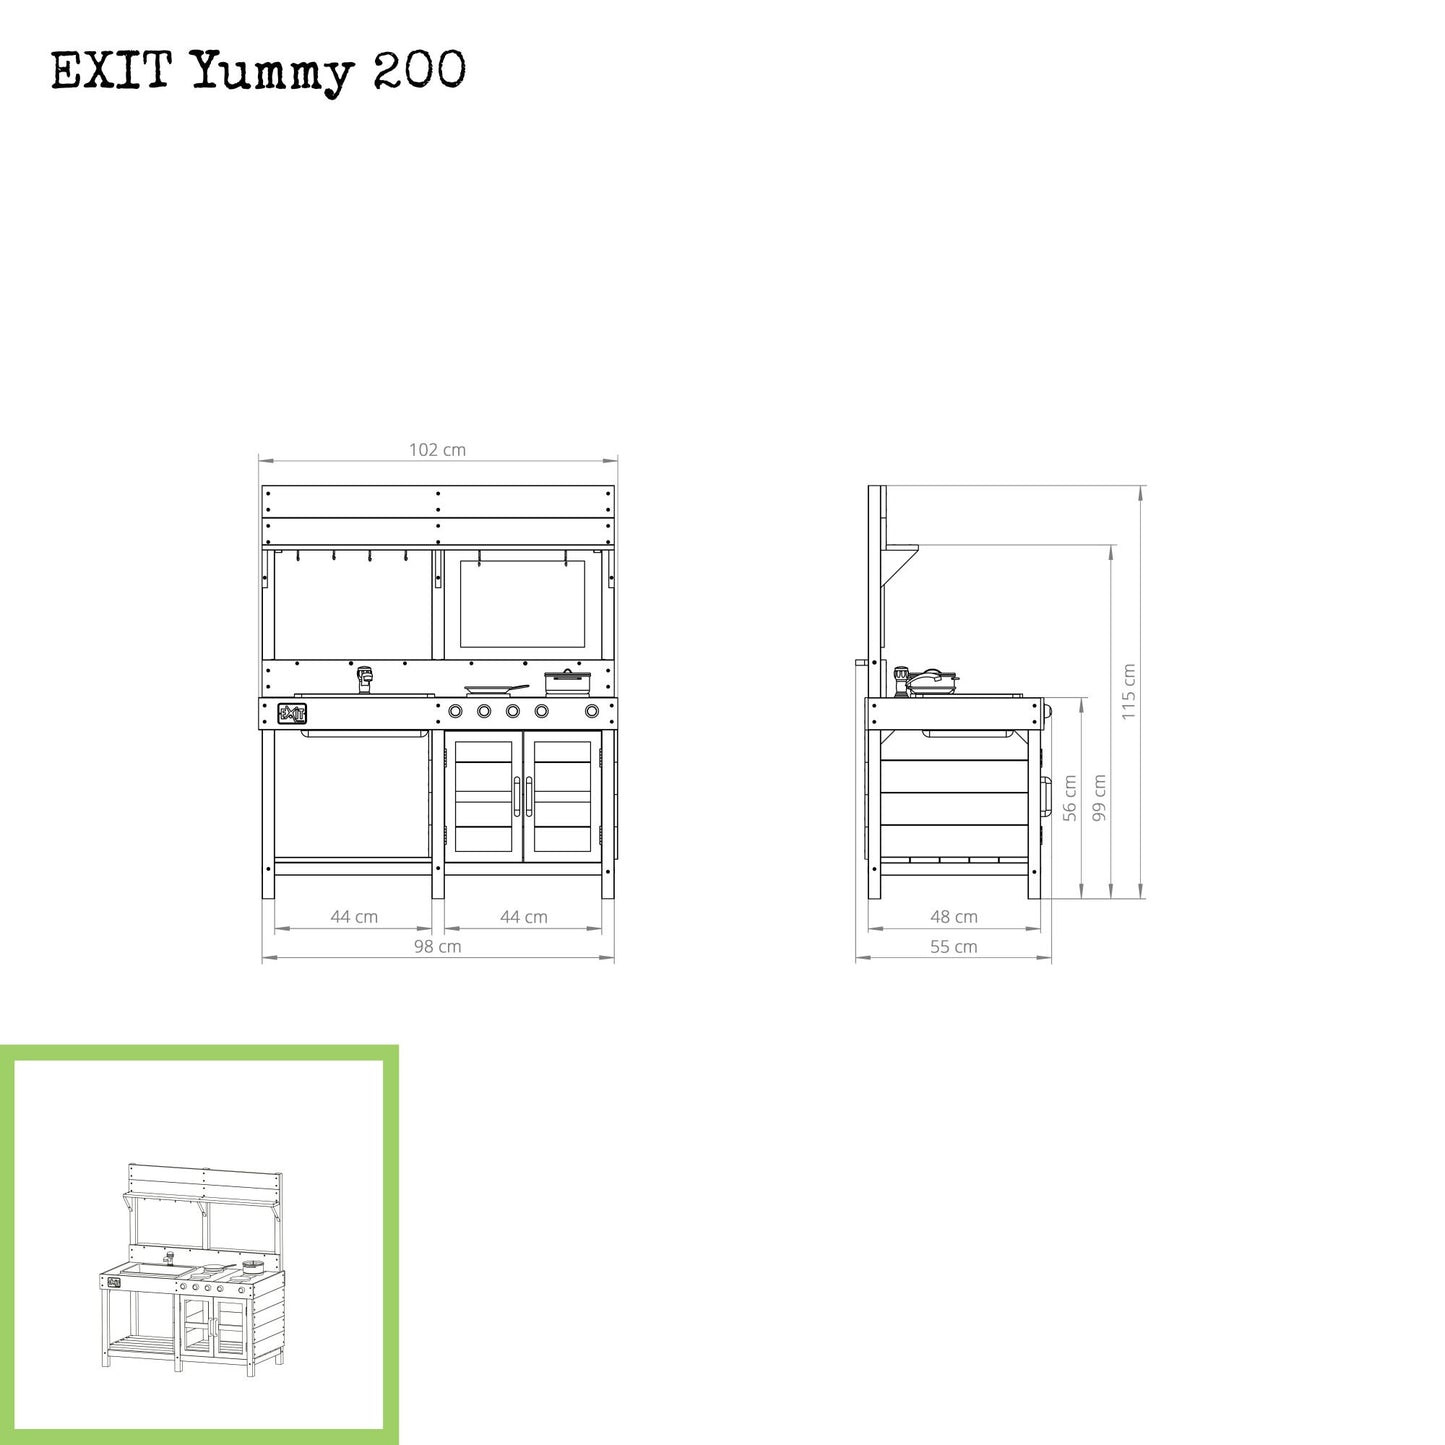 EXIT Yummy 200 Wooden Outdoor Kitchen (Natural)